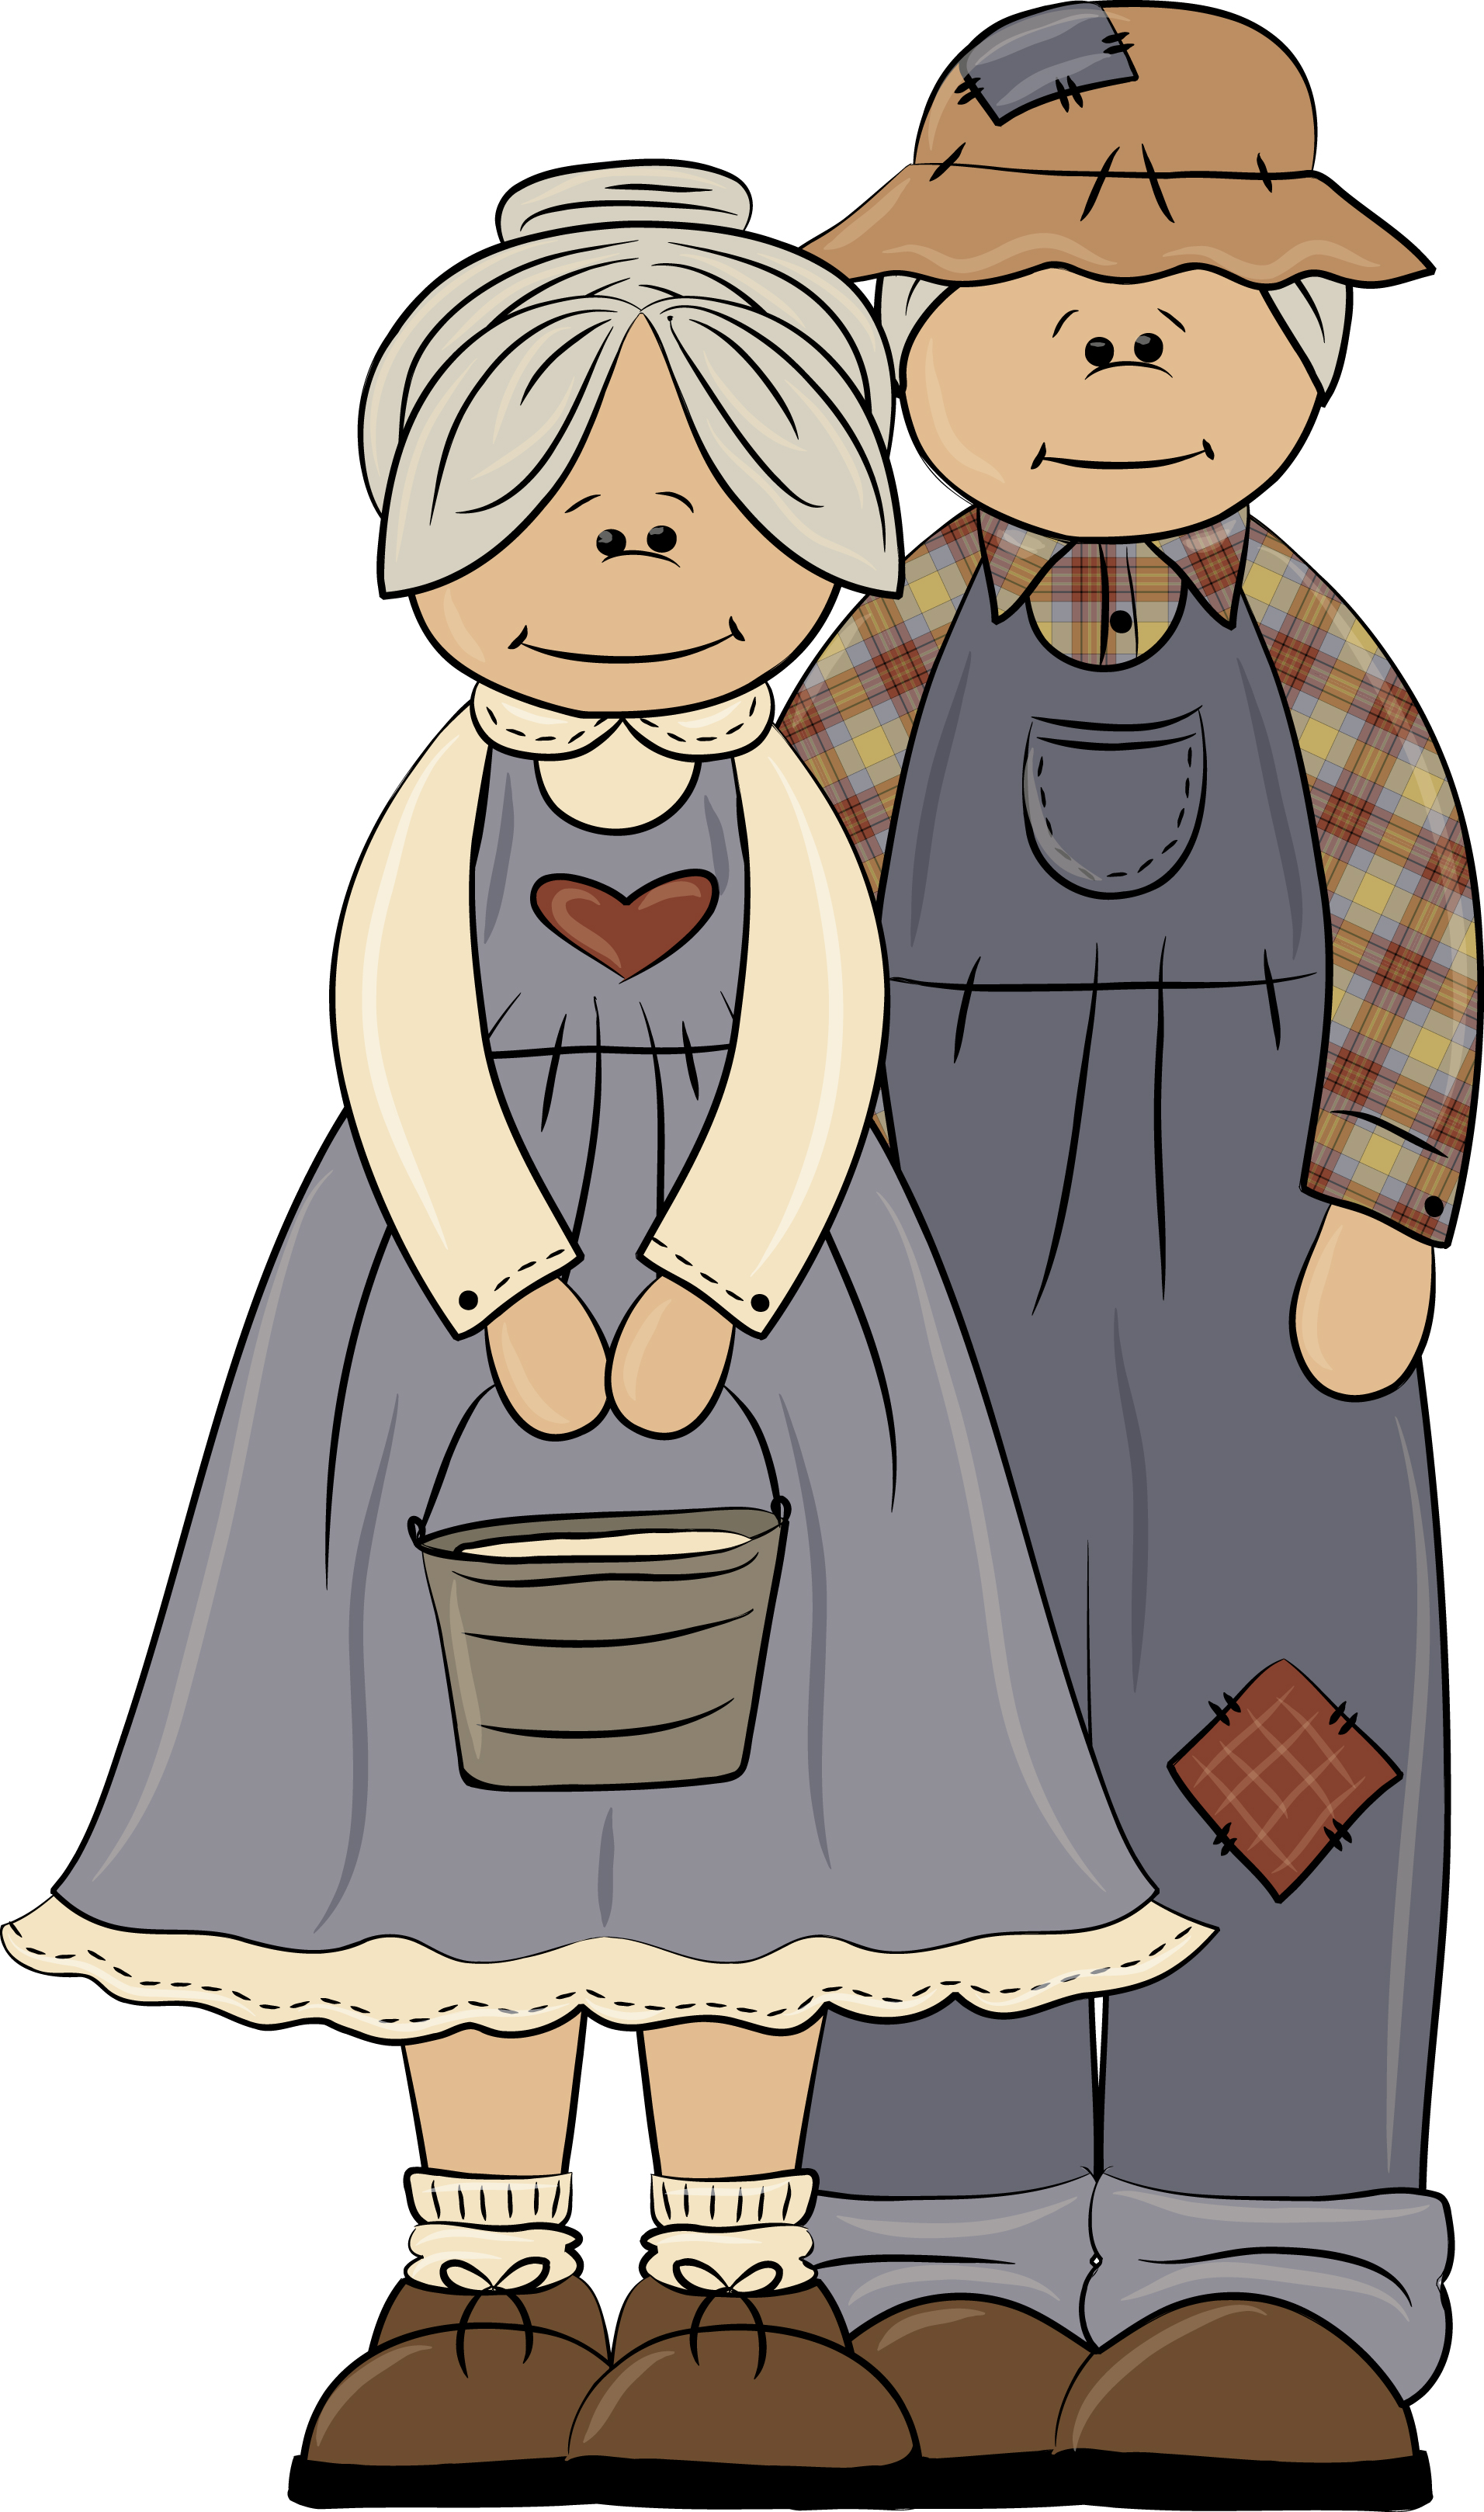 Heres-some-cute-country-grandparents-clipart-to-use-as-National-Grandparents-Day-clipart-605x1024.jpg